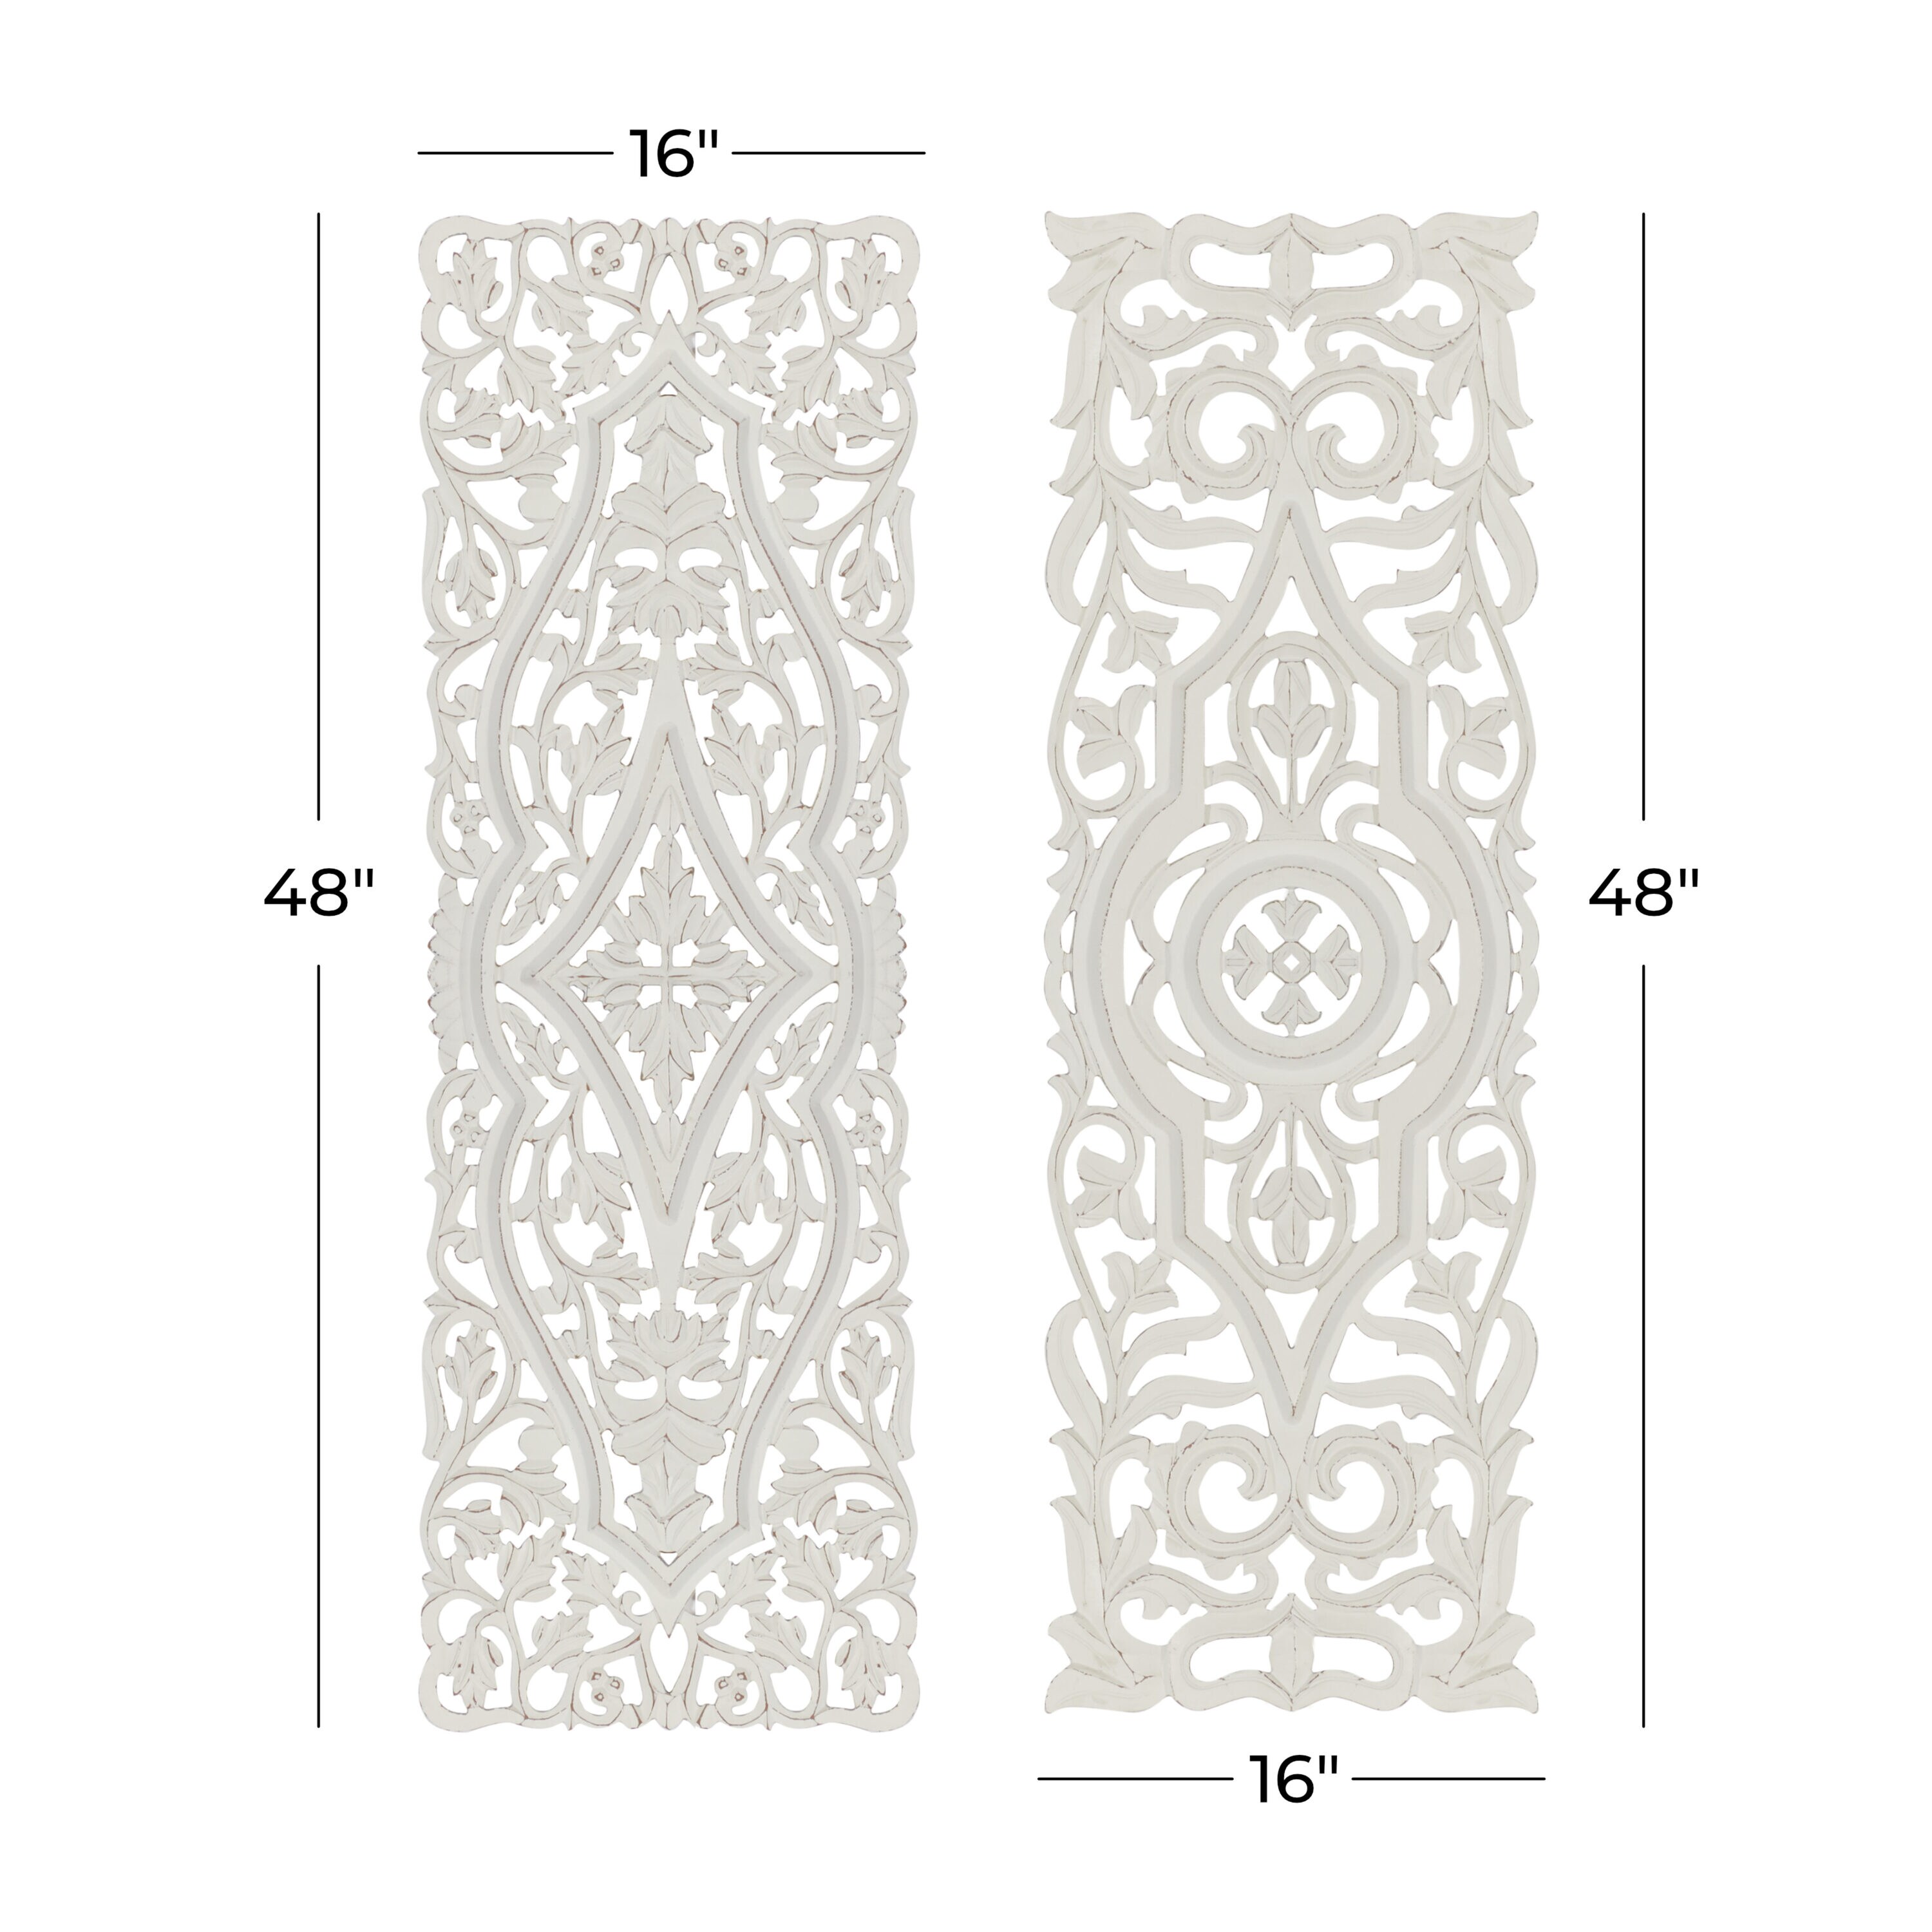 Grayson Lane 15.5-in W x 47.75-in H Wood Floral Wall Sculpture in the ...